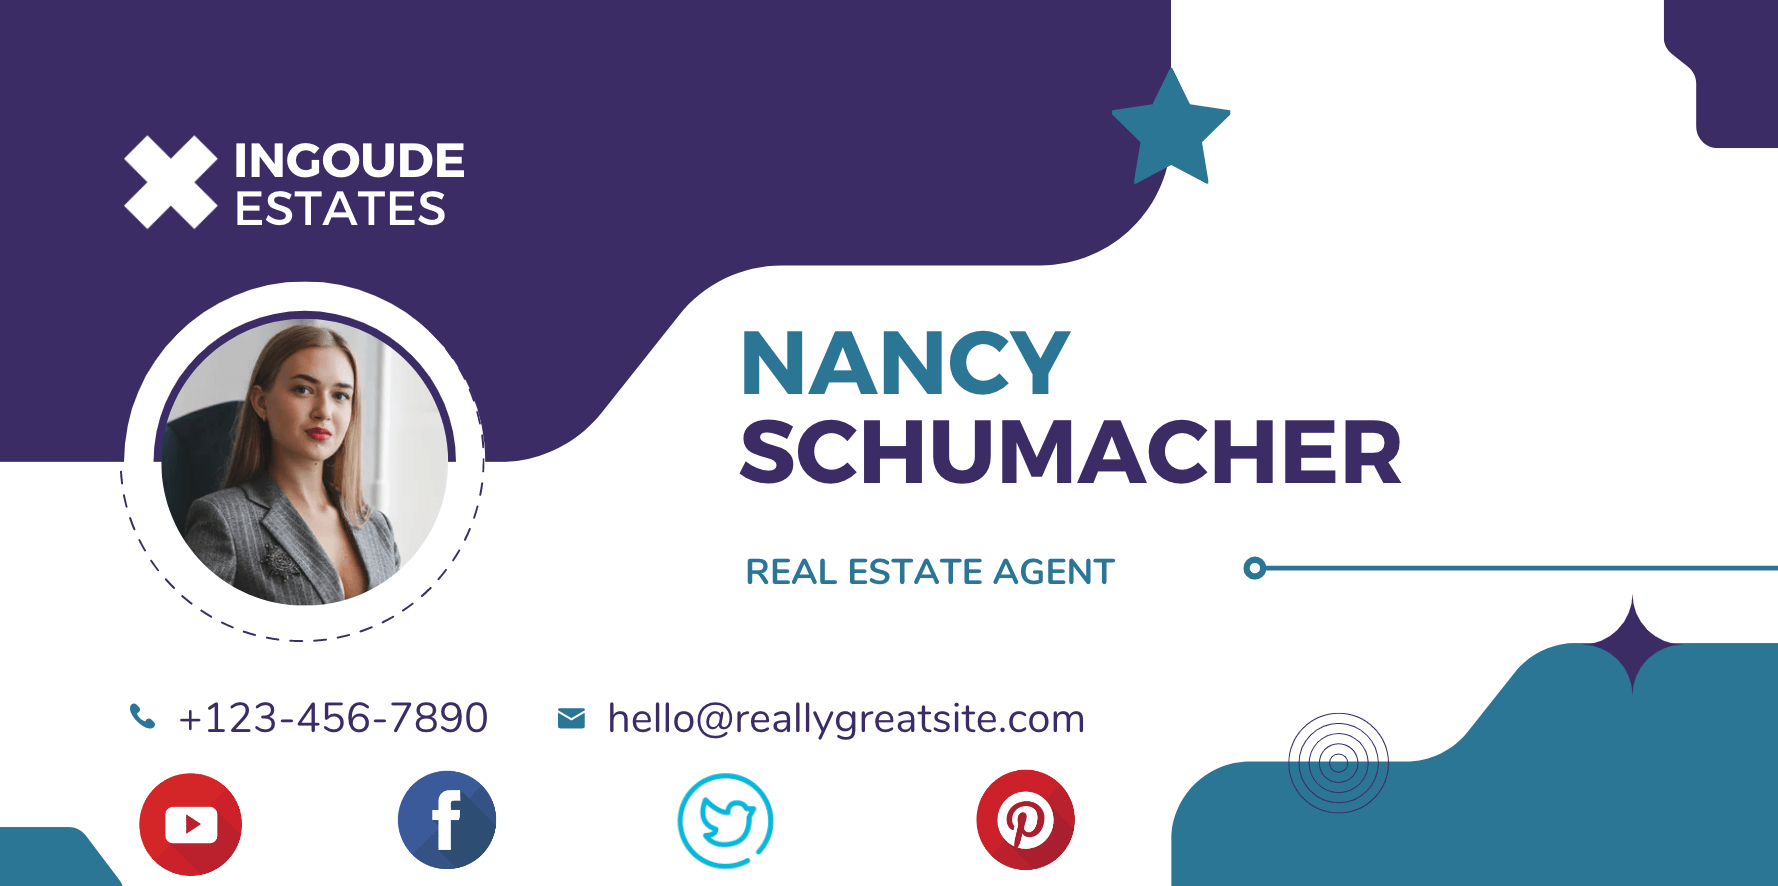 Real estate email signature with social profile links